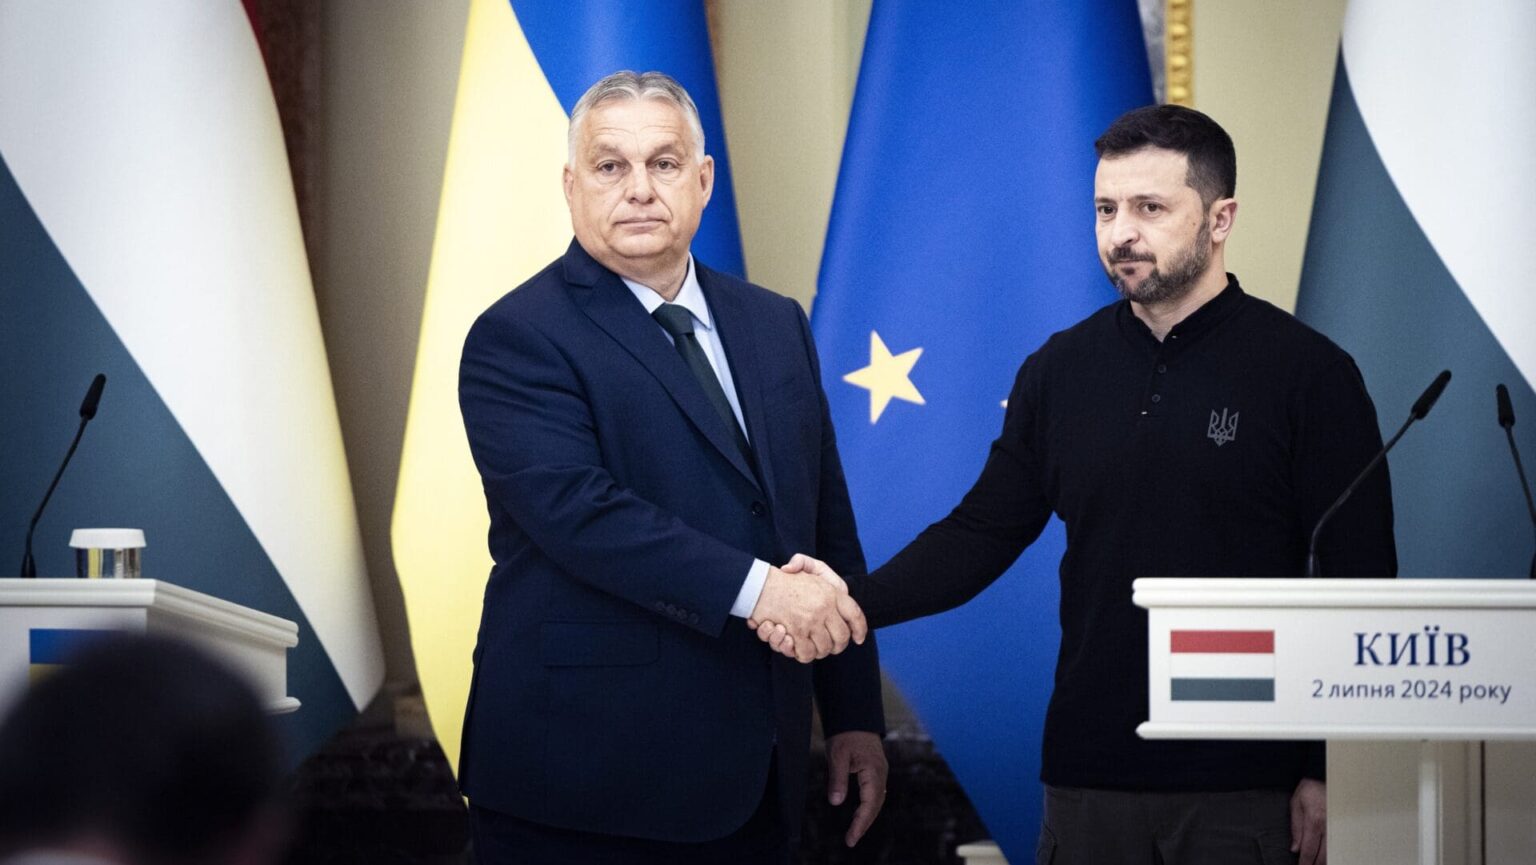 Orbán Asks Zelenskyy to Consider Time-Bound Ceasefire, Assures Ukraine of Hungary’s Support